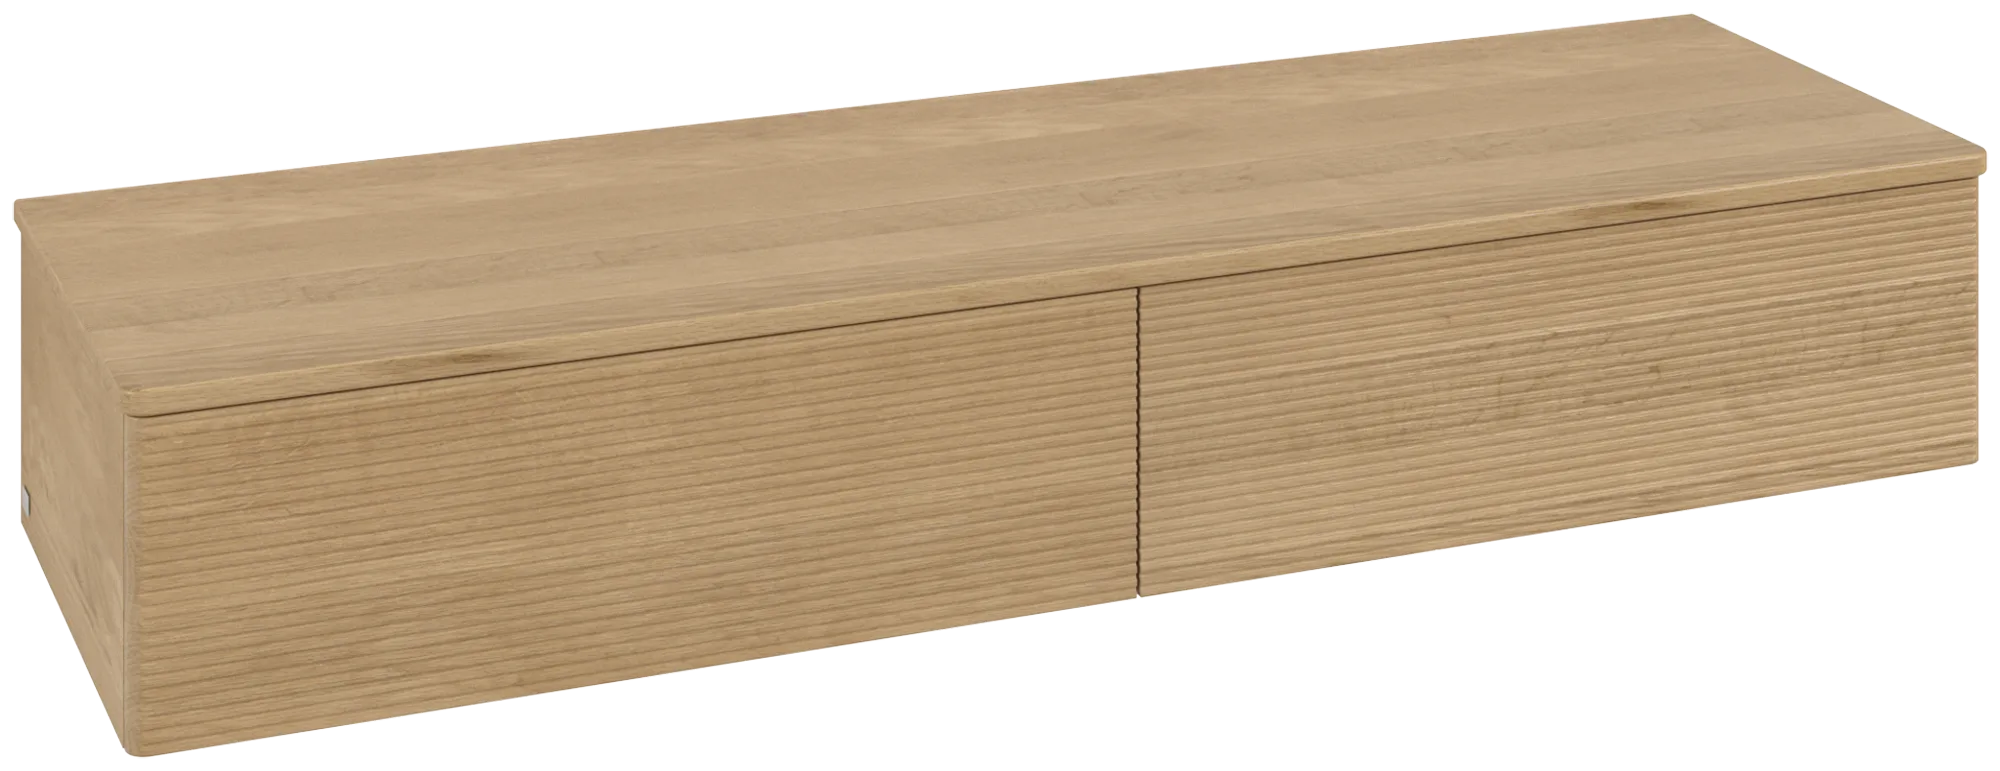 Picture of VILLEROY BOCH Antao Sideboard, 2 pull-out compartments, 1600 x 268 x 500 mm, Front with grain texture, Honey Oak / Honey Oak #K42101HN